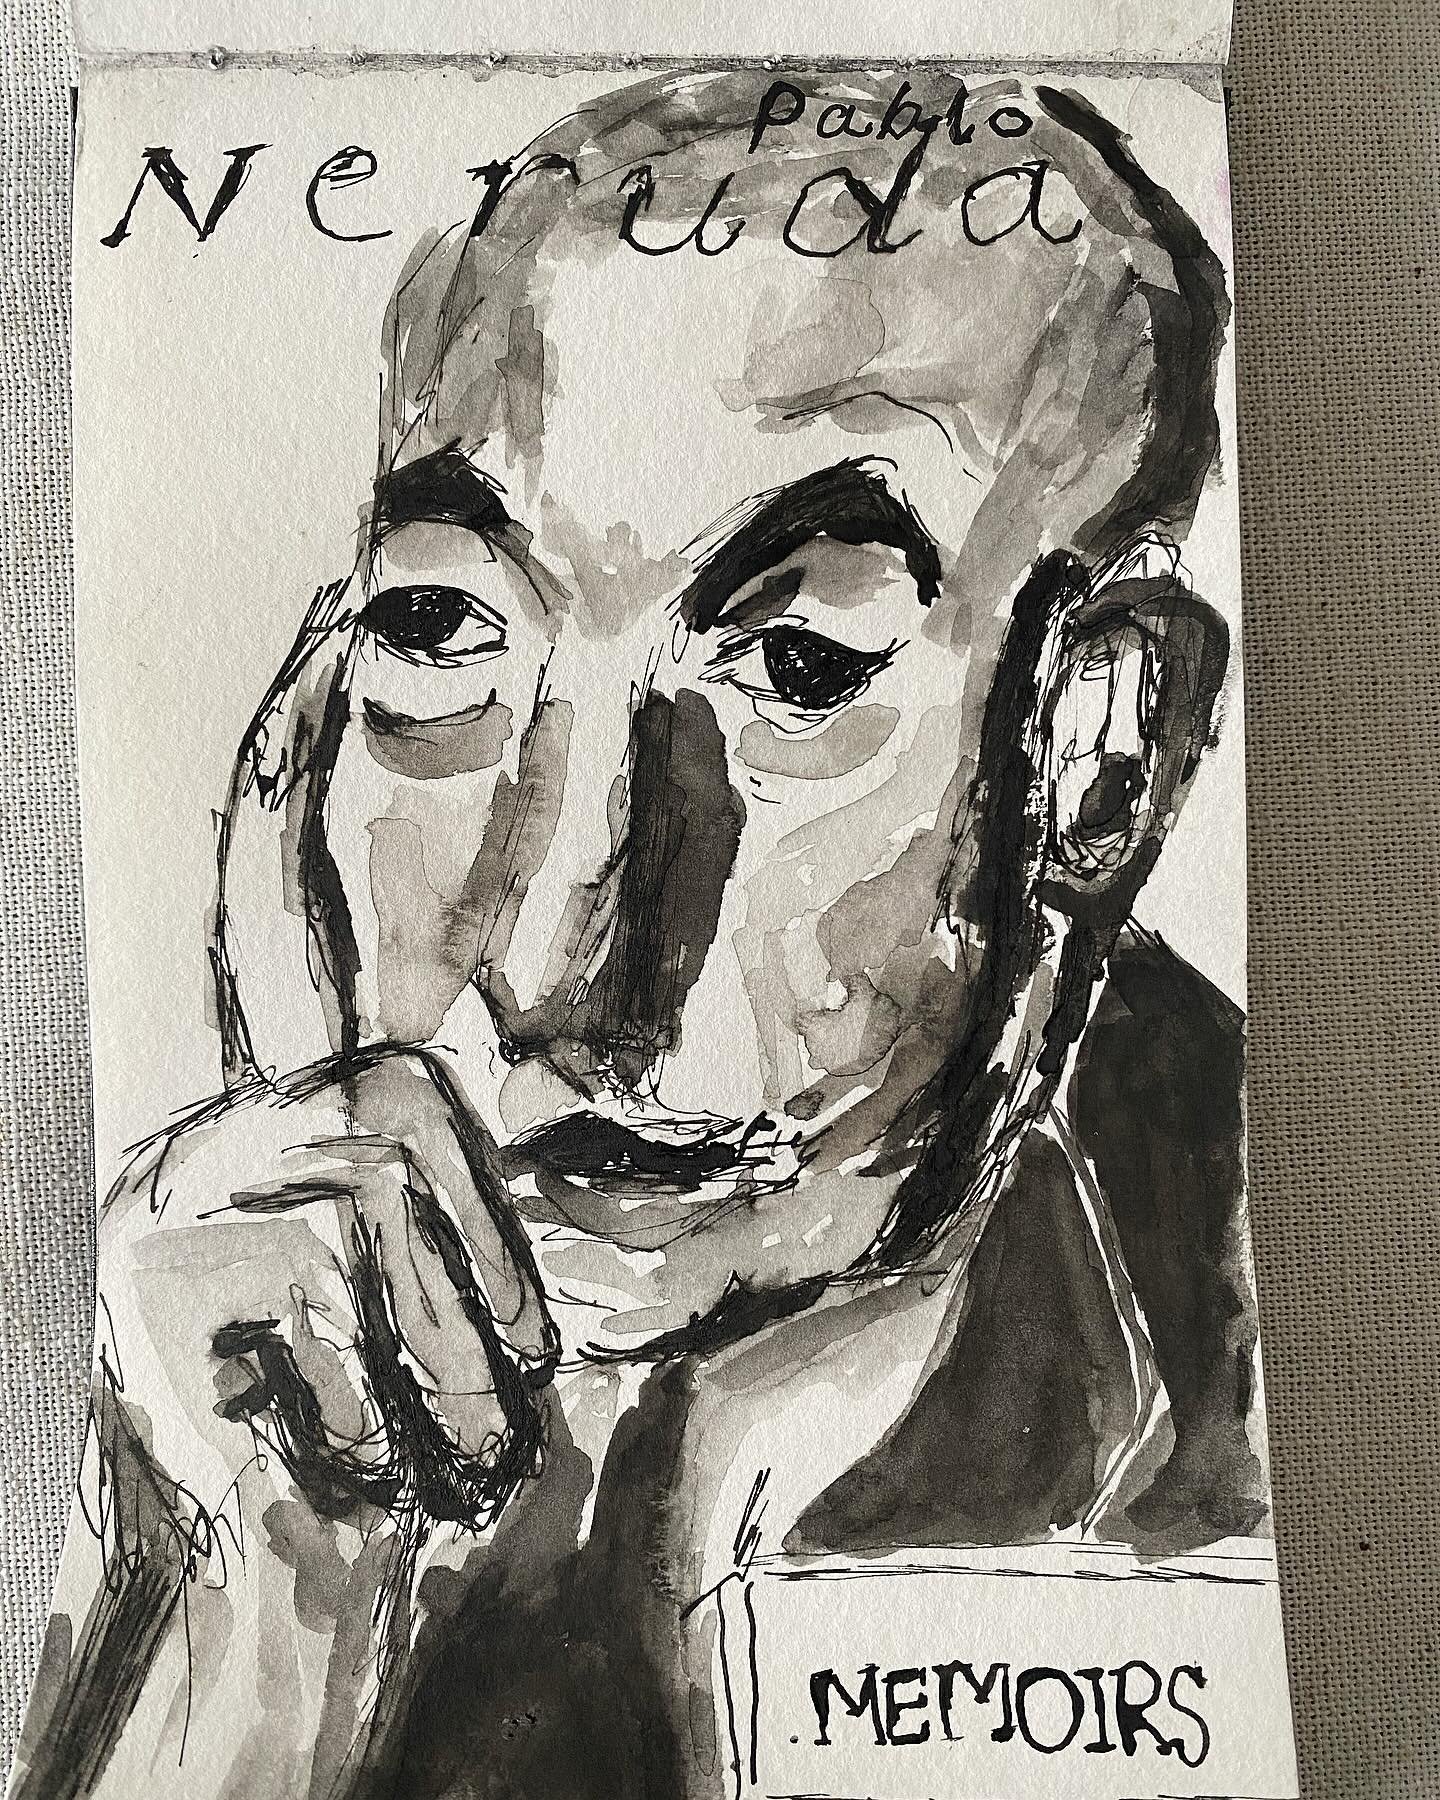 I stumbled upon a copy of Pablo Neruda&rsquo;s &ldquo;Memoirs&rdquo; the other day when I was cleaning my house. I forgot I had it. I was obsessed with Neruda&rsquo;s poetry when I was an undergrad (very cliche I know) but his memoirs are just as lov